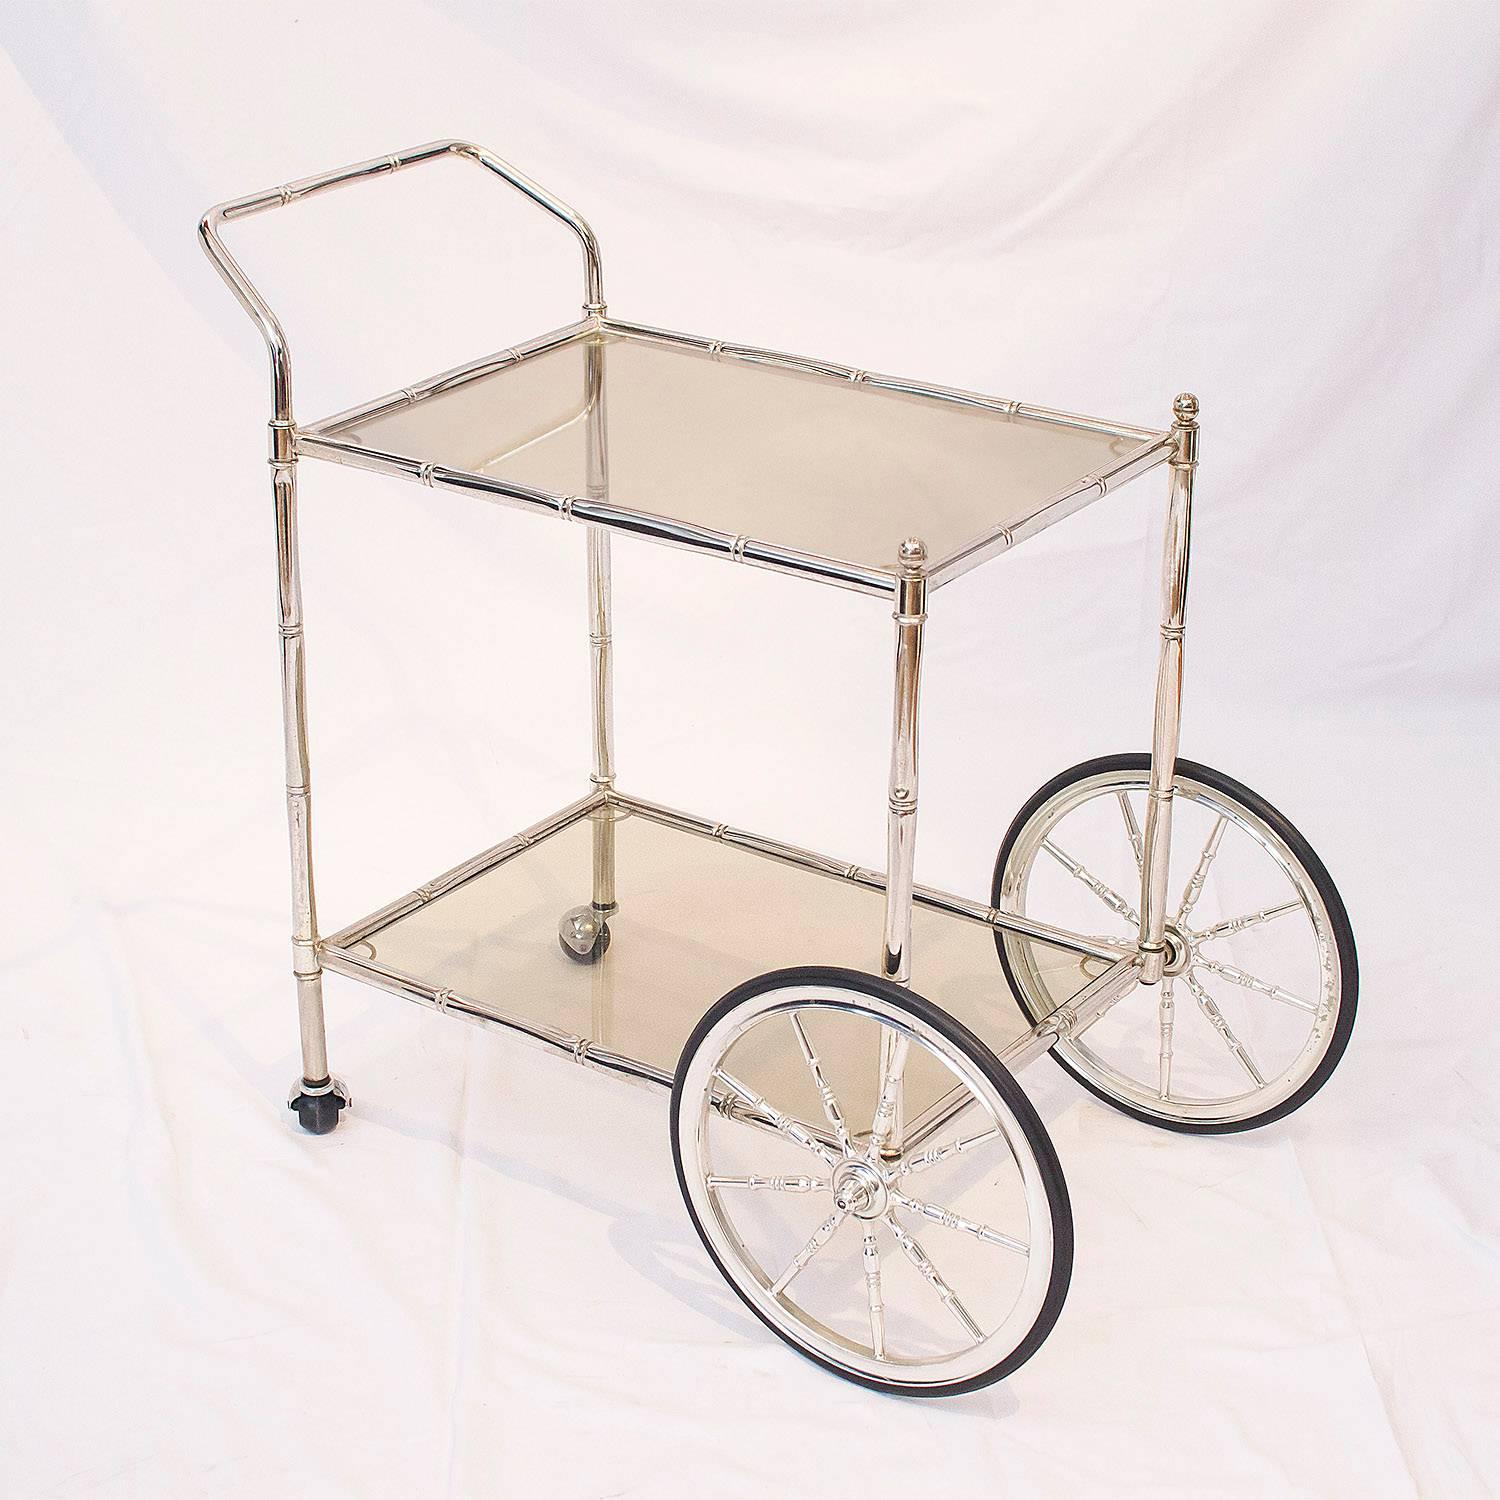 Faux bamboo chrome and glass bar cart, France, 1960s.

Please contact us for delivery details.